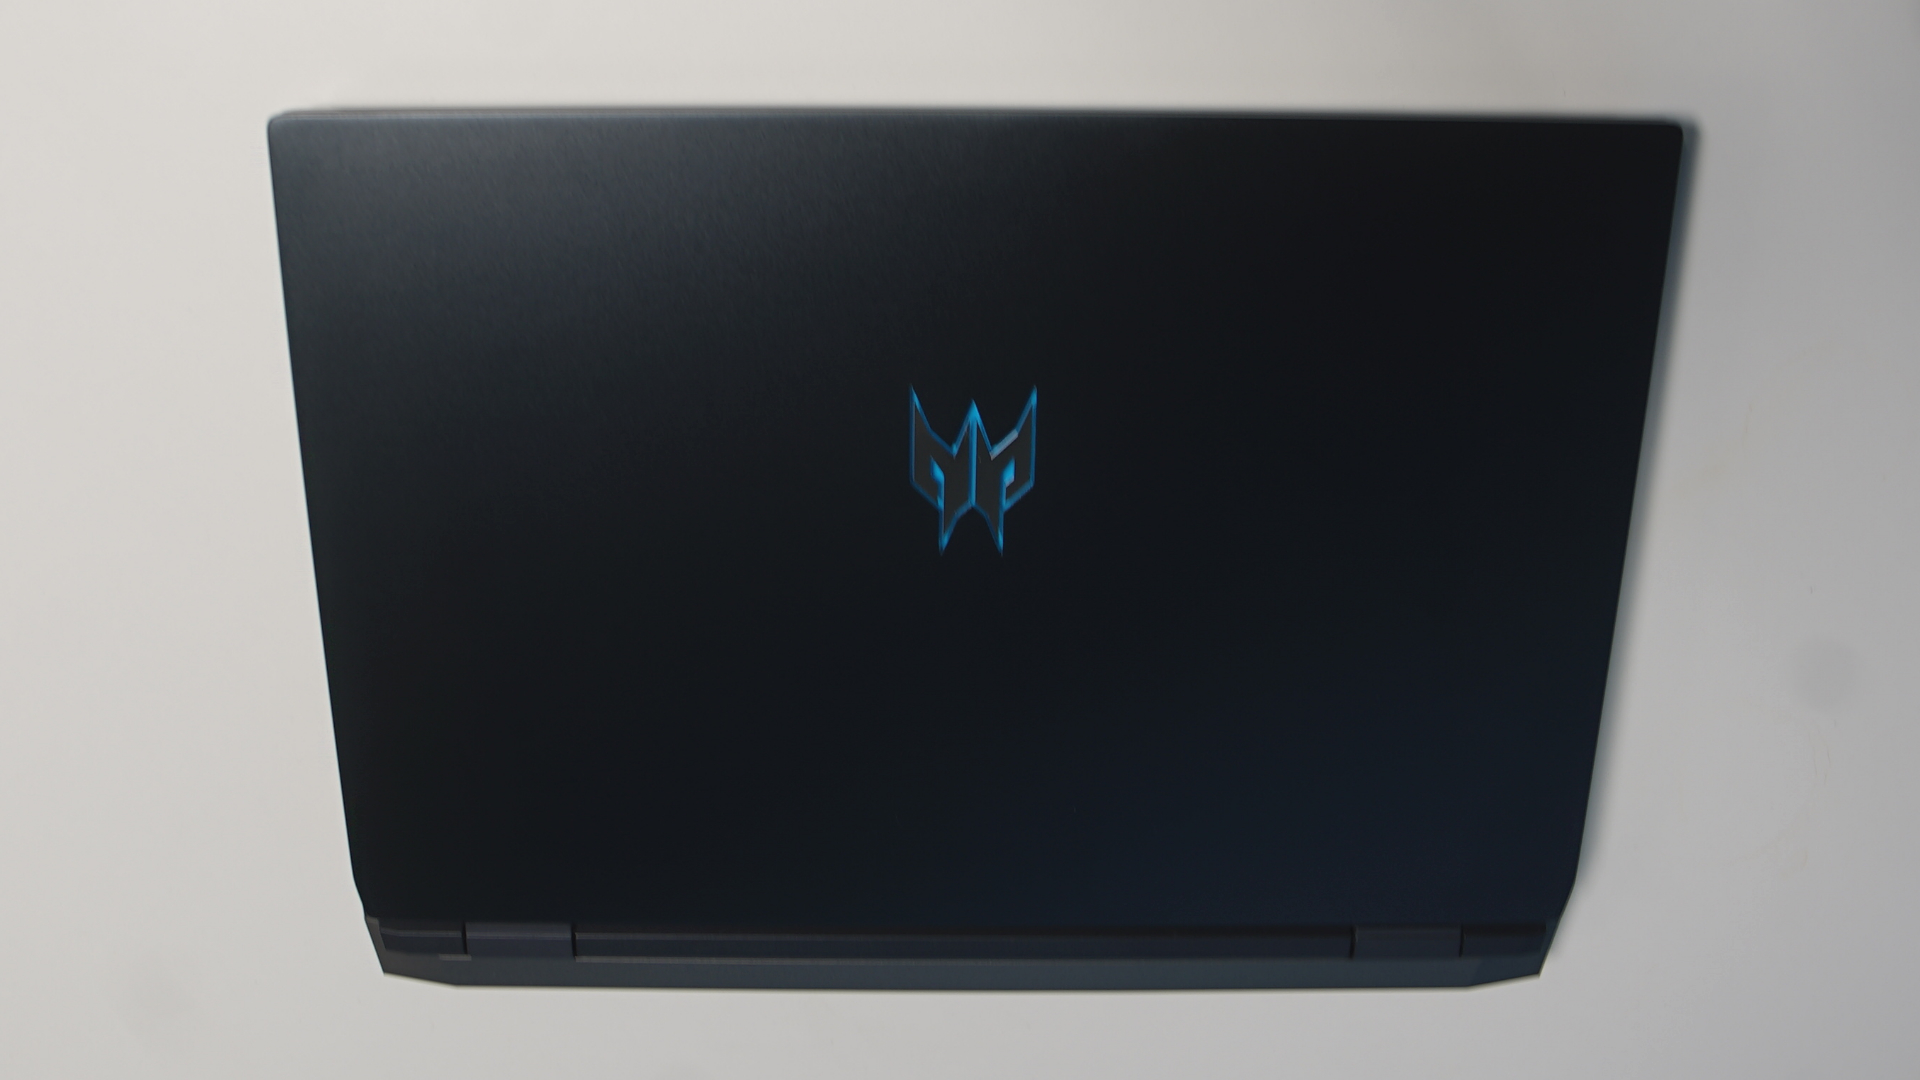 Acer Predator Helios gaming laptop from the back.